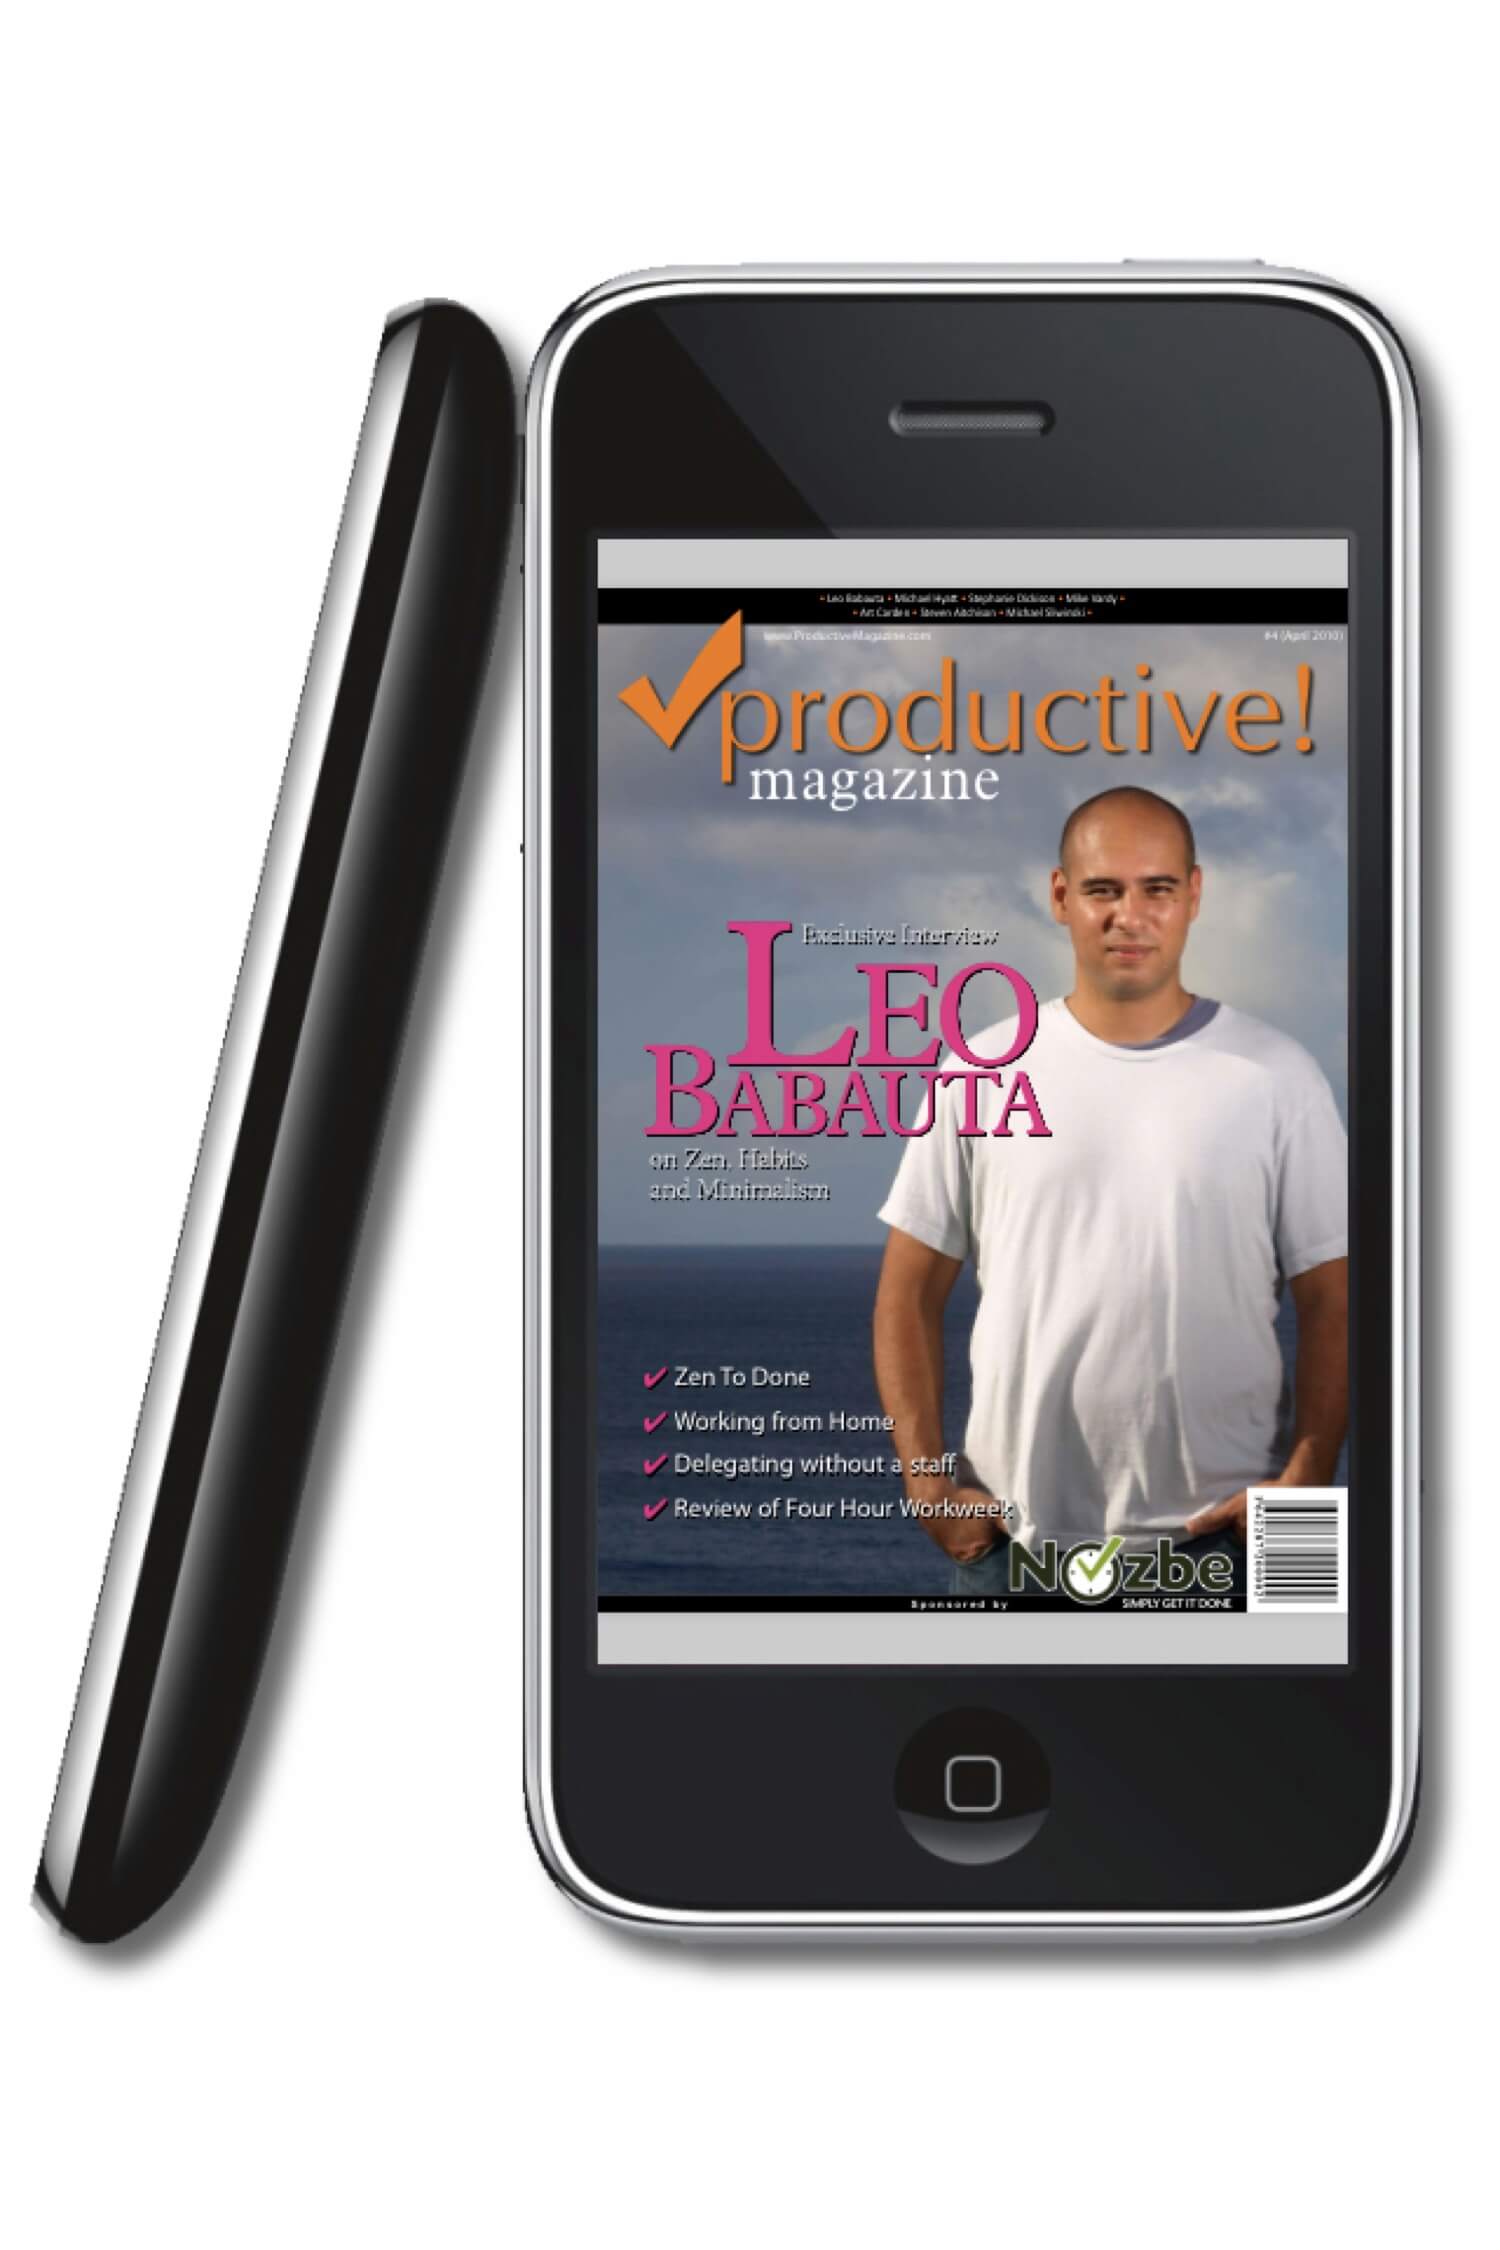 Productive! Magazine #4 available! Leo Babauta interview and productivity tips and tricks. iPhone